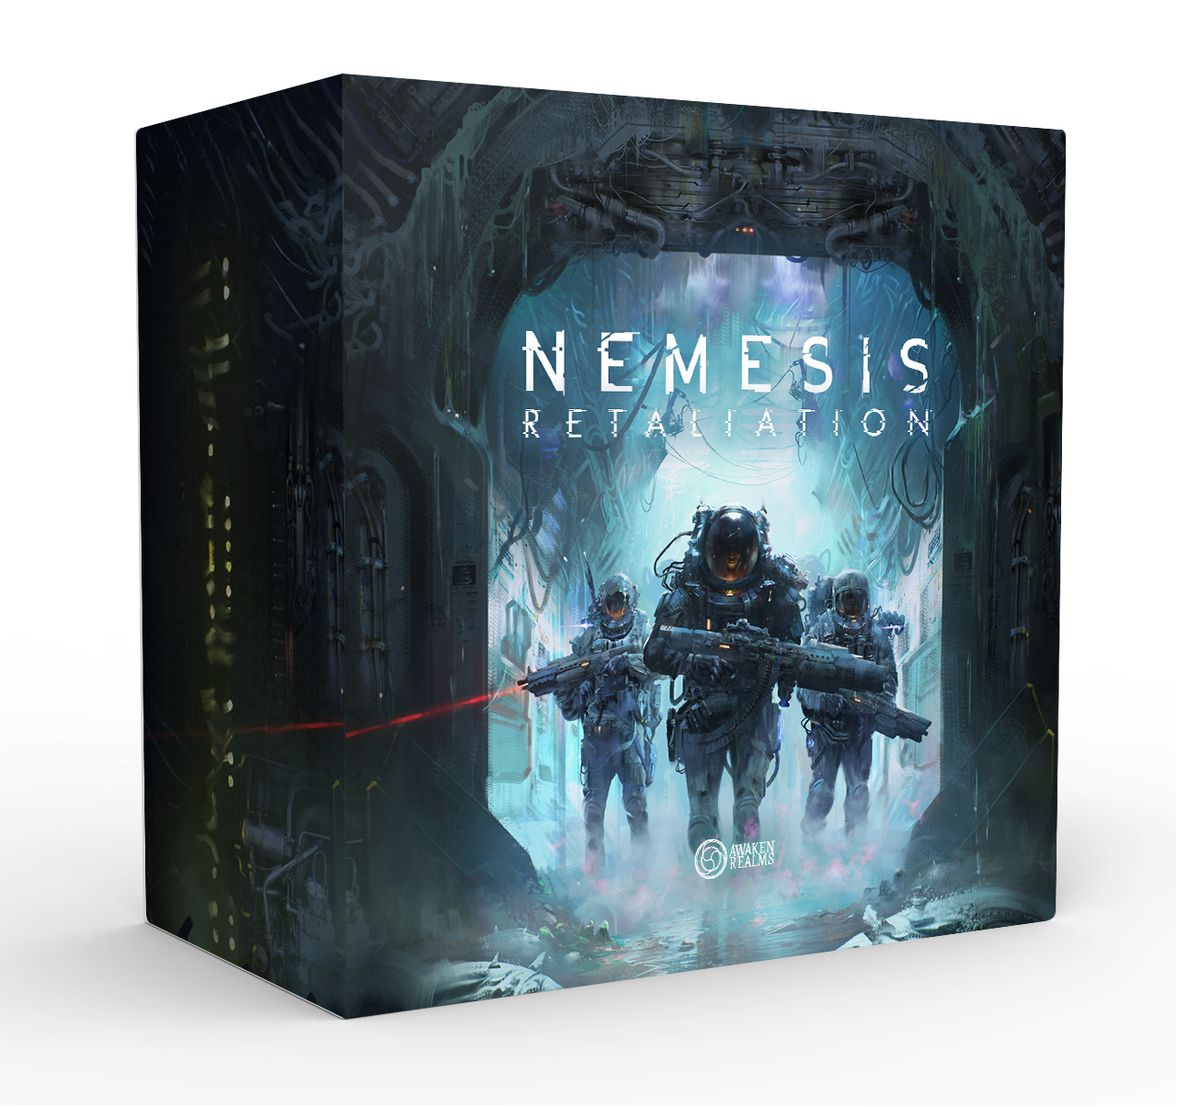 STALKER board game announced, from the team behind Nemesis, ISS Vanguard